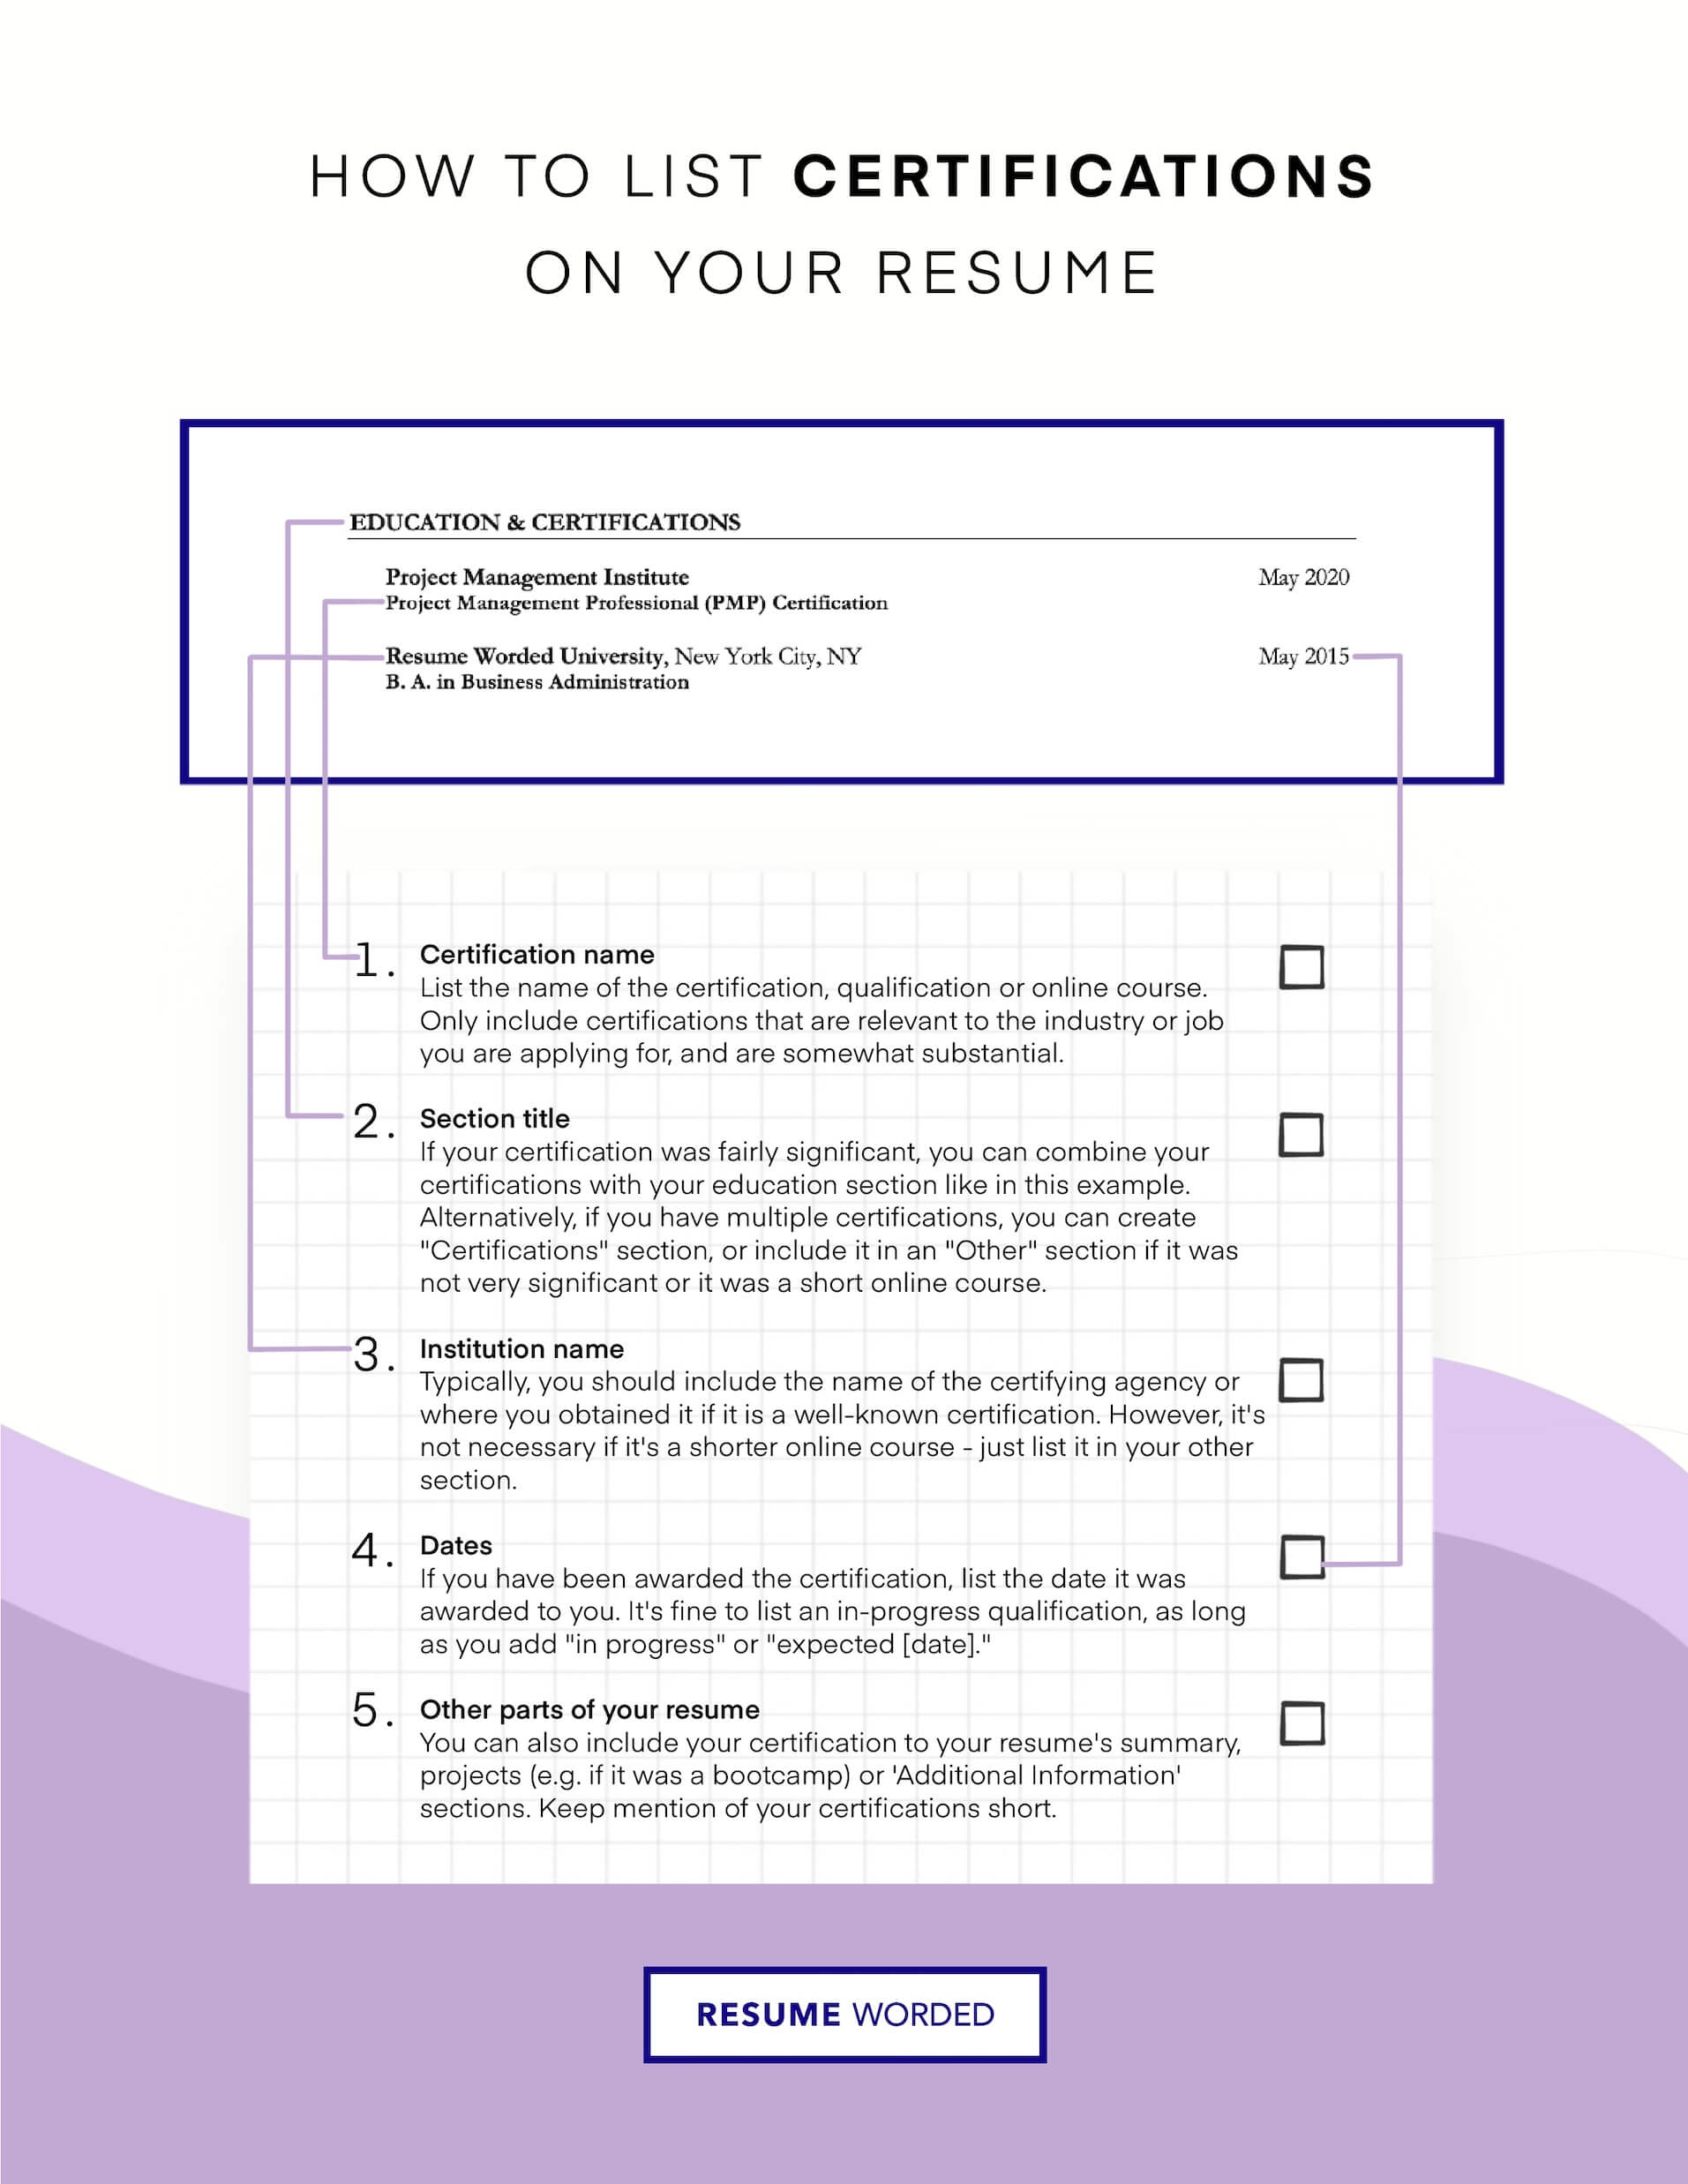 Invest in gaining relevant certification. - Entry-Level Technical Writer Resume